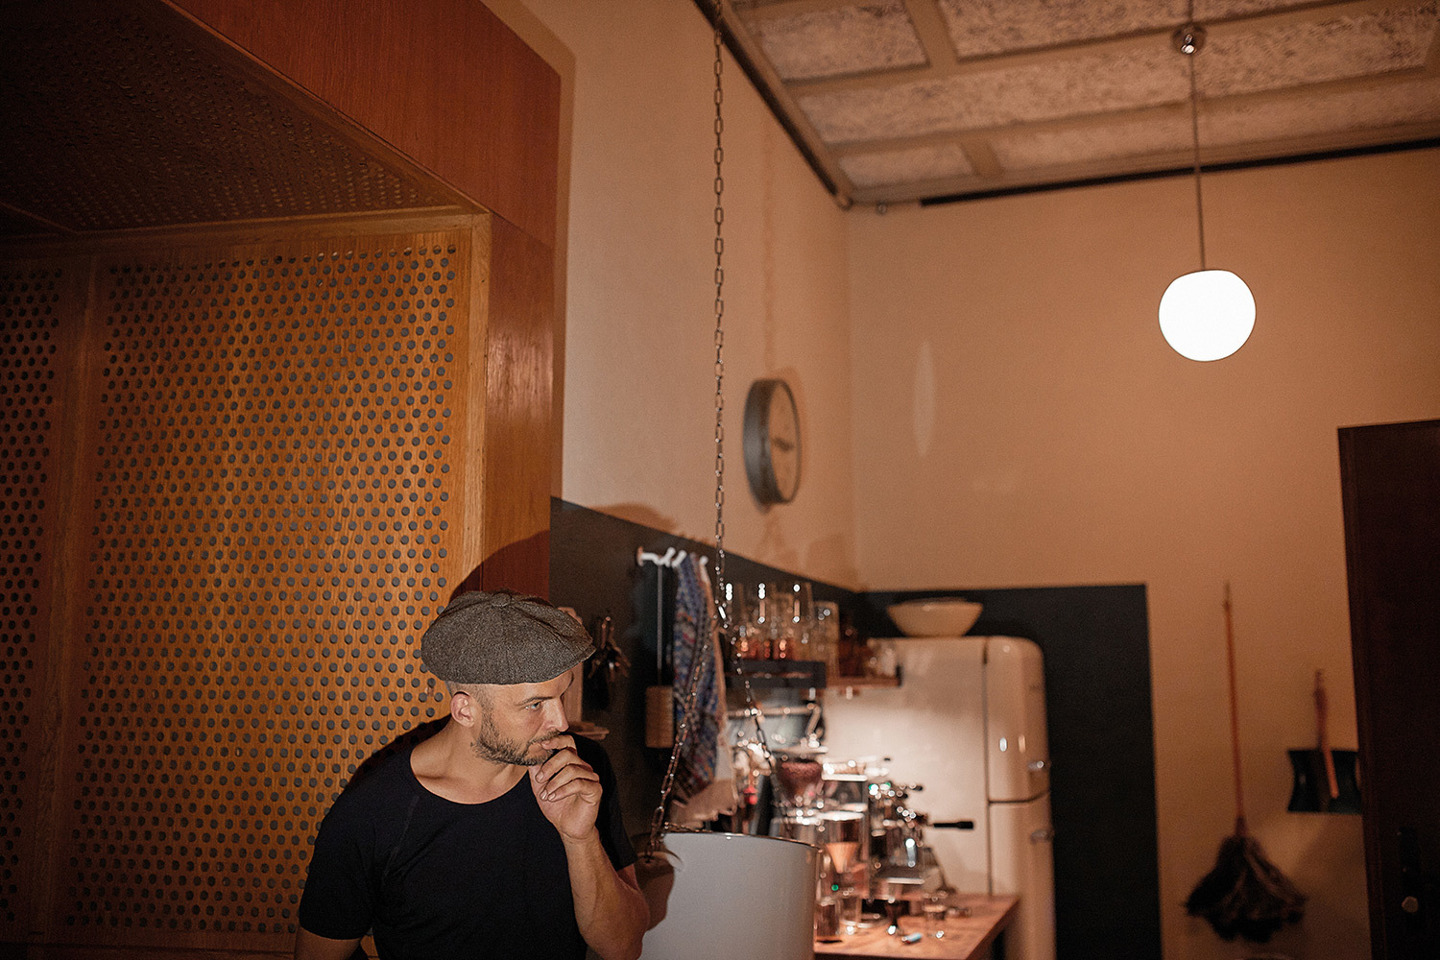 A VISIT TO THE STUDIO OF NILS FRAHM 1/2